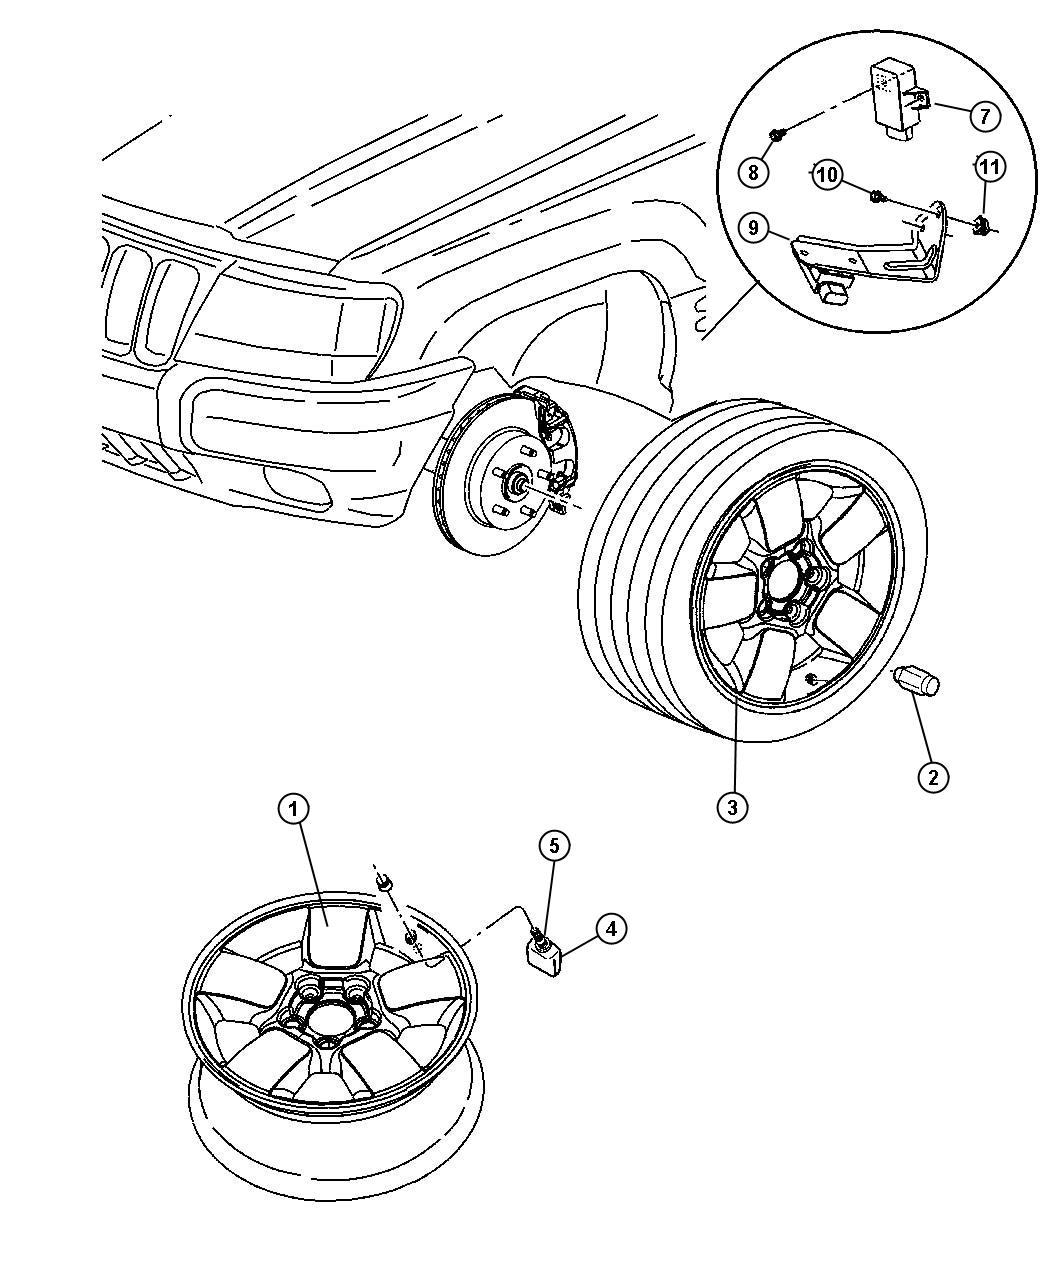 Wheels and Hardware. Diagram